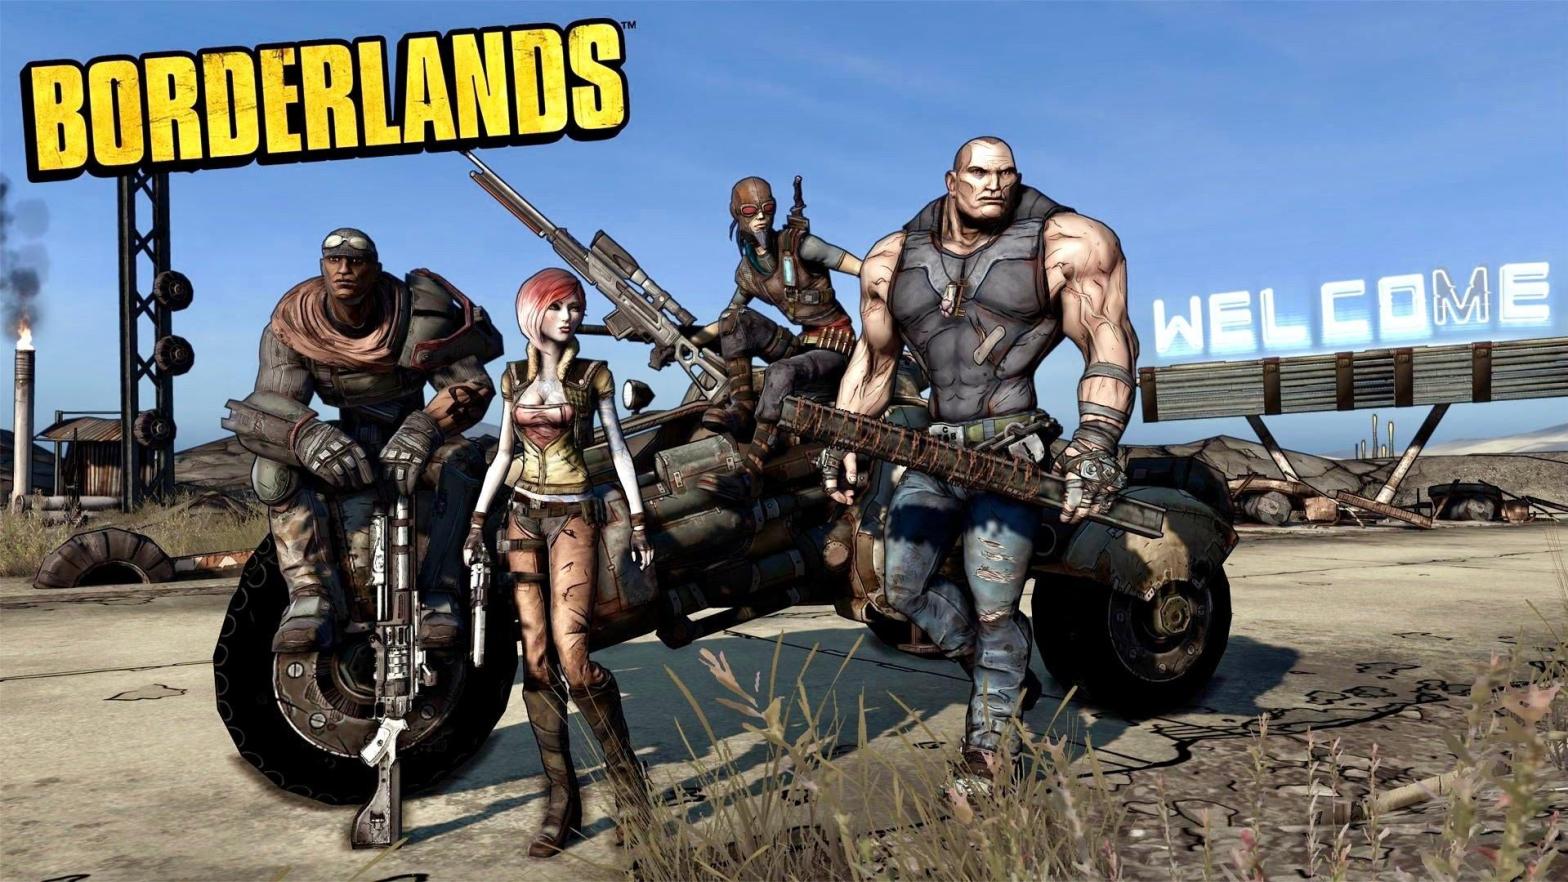 The crew from Borderlands (Image: 2K Games)